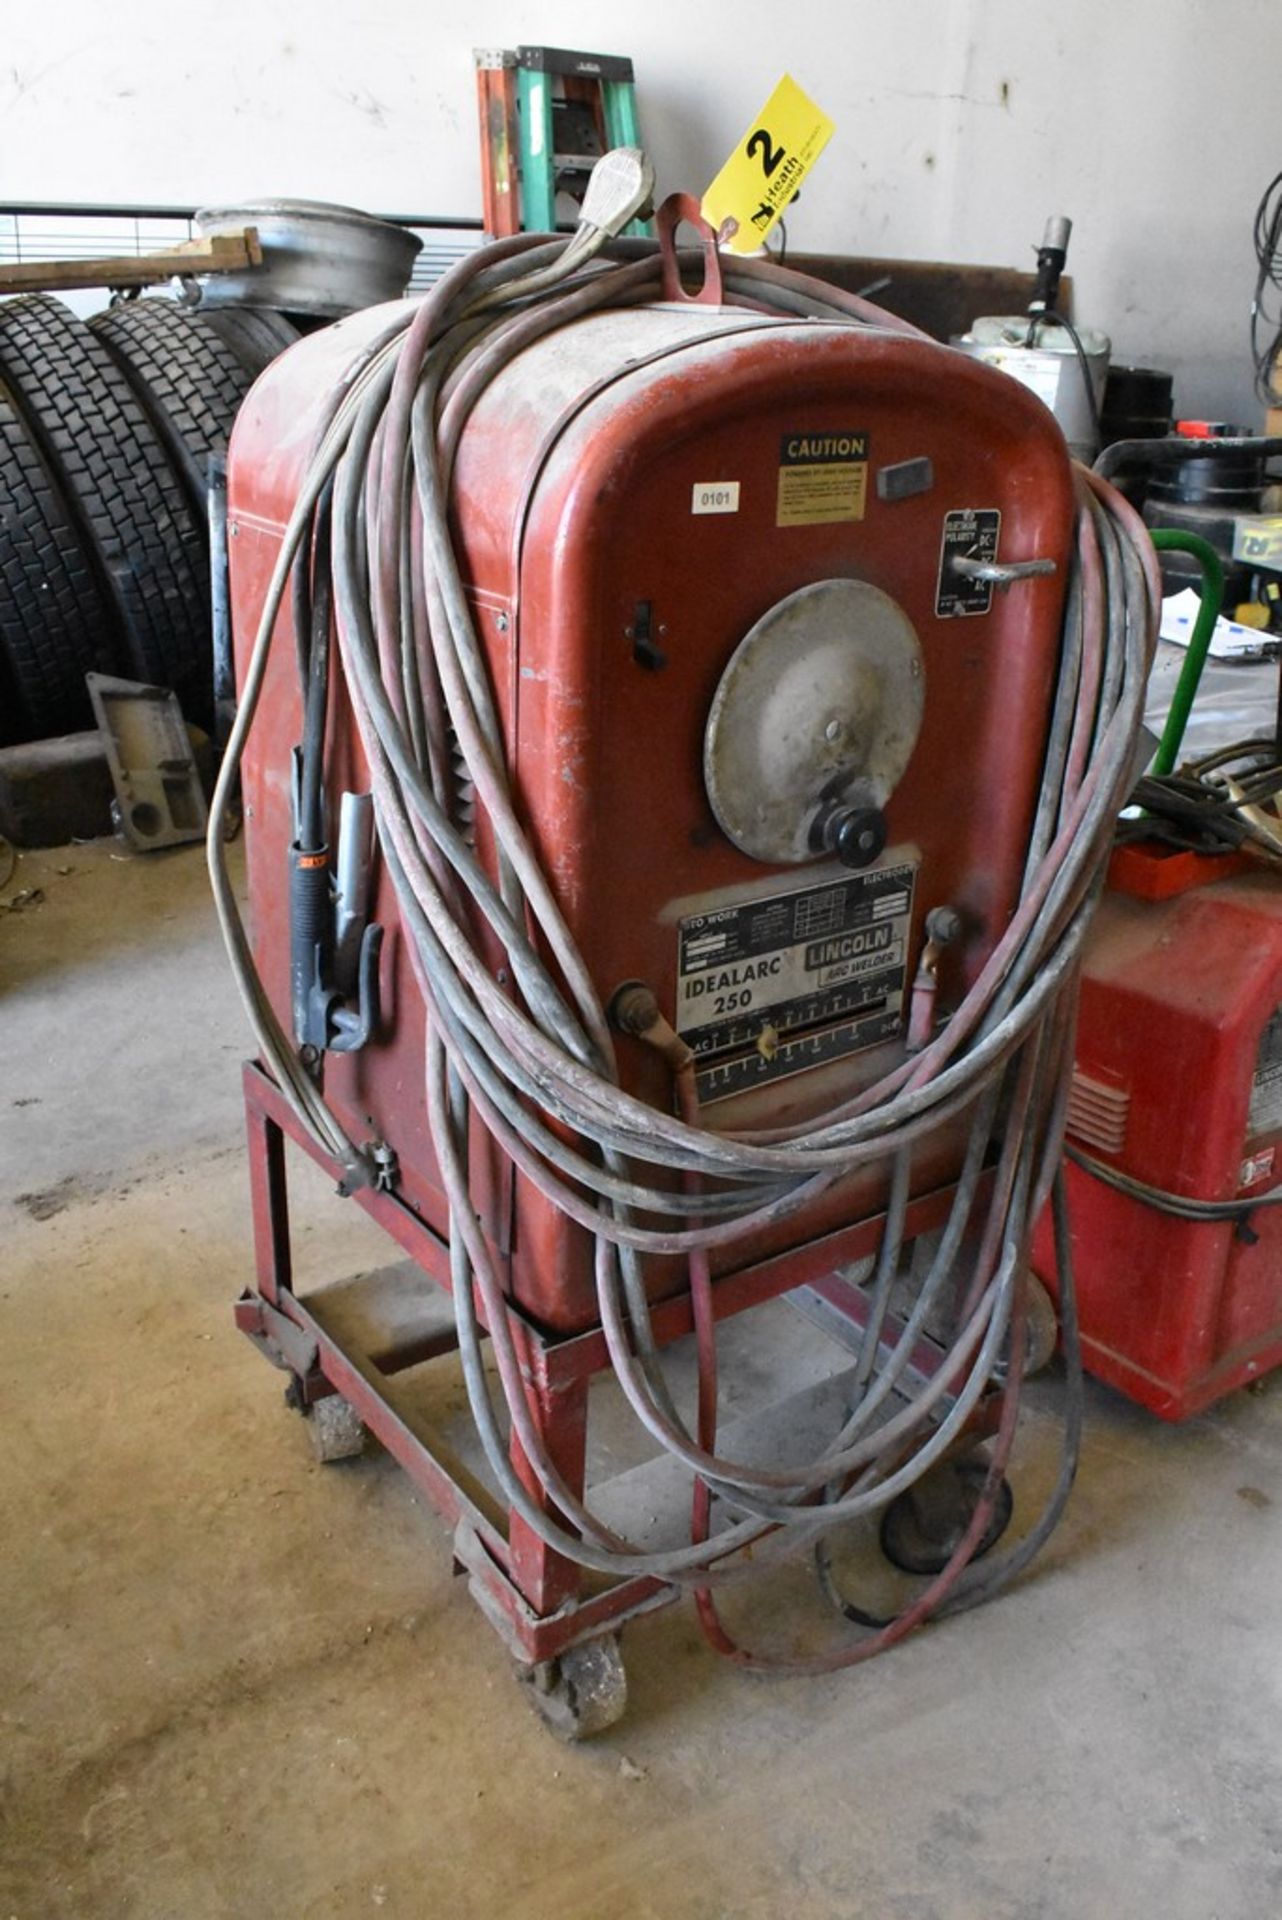 LINCOLN IDEALARC 250 WELDER S/N AC-42563 - Image 2 of 3